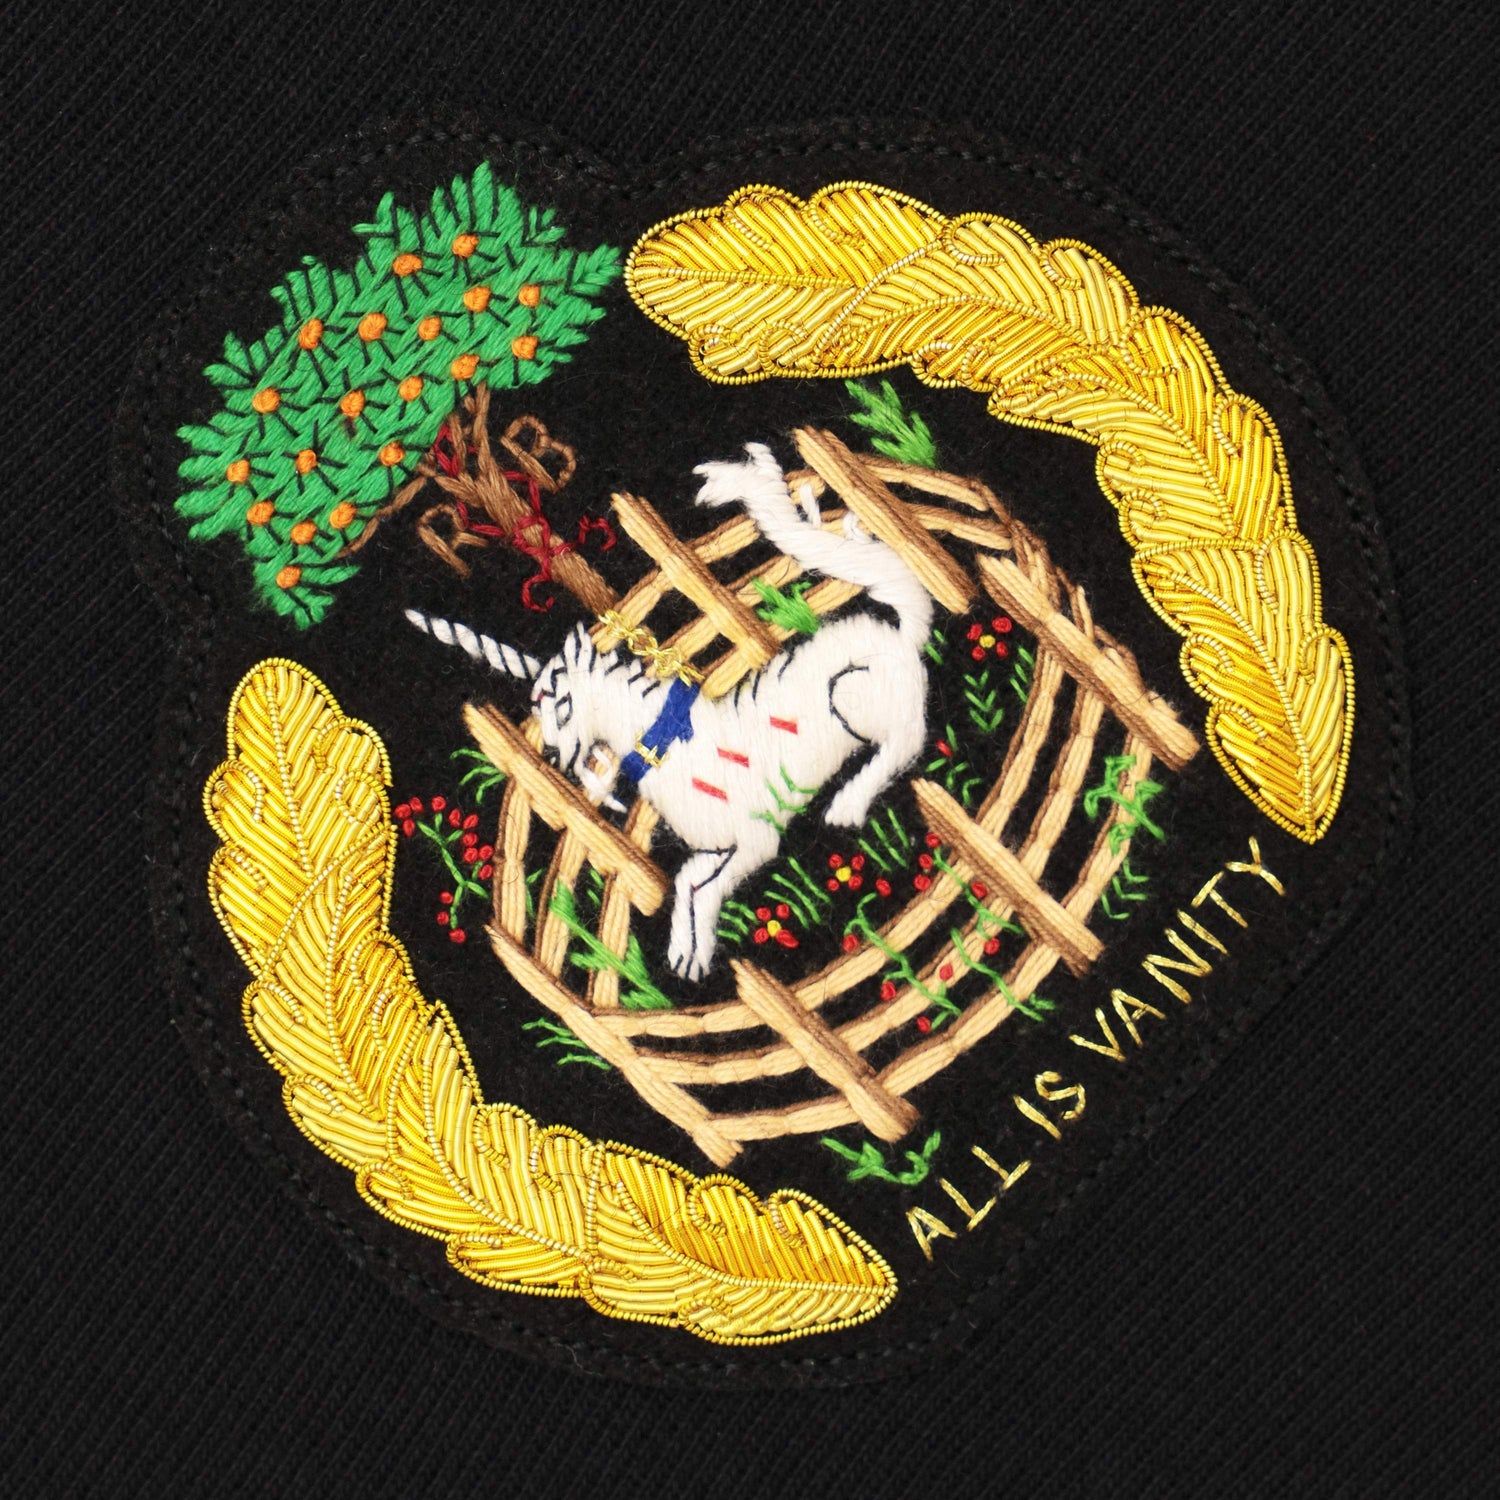 Goldwork unicorn motif and the words "All is Vanity."